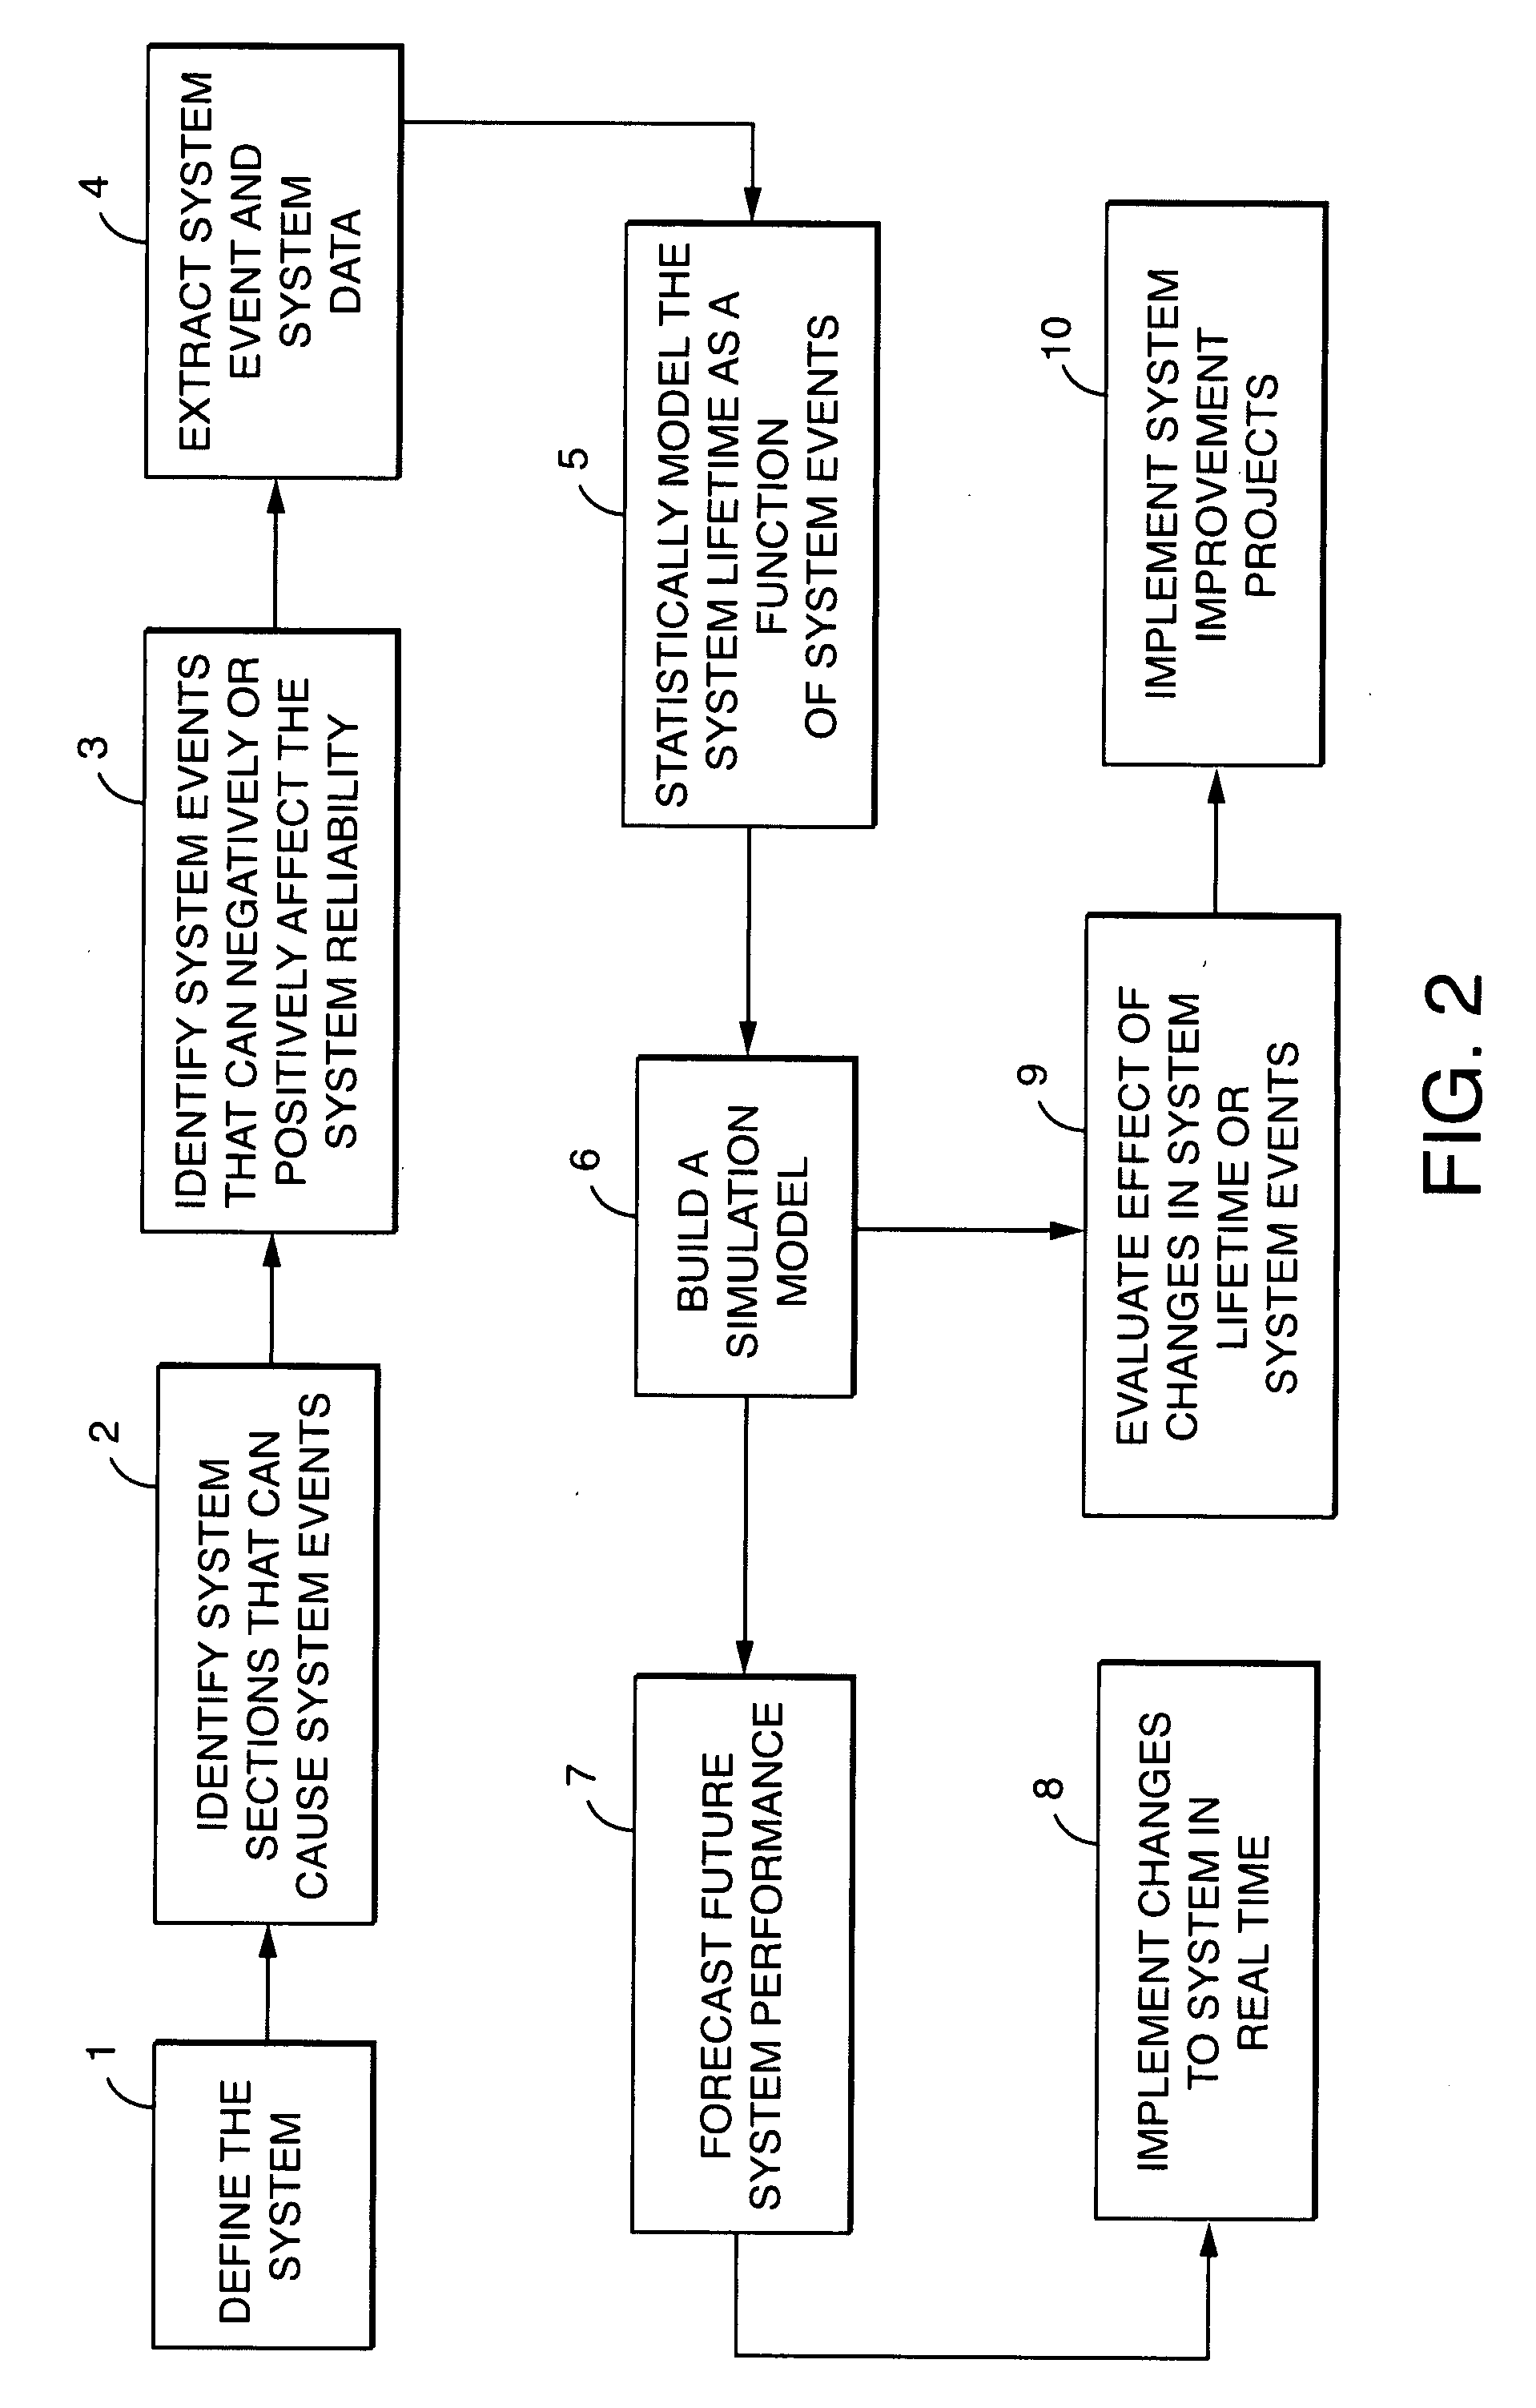 Method for simulating a system having multiple failure modes